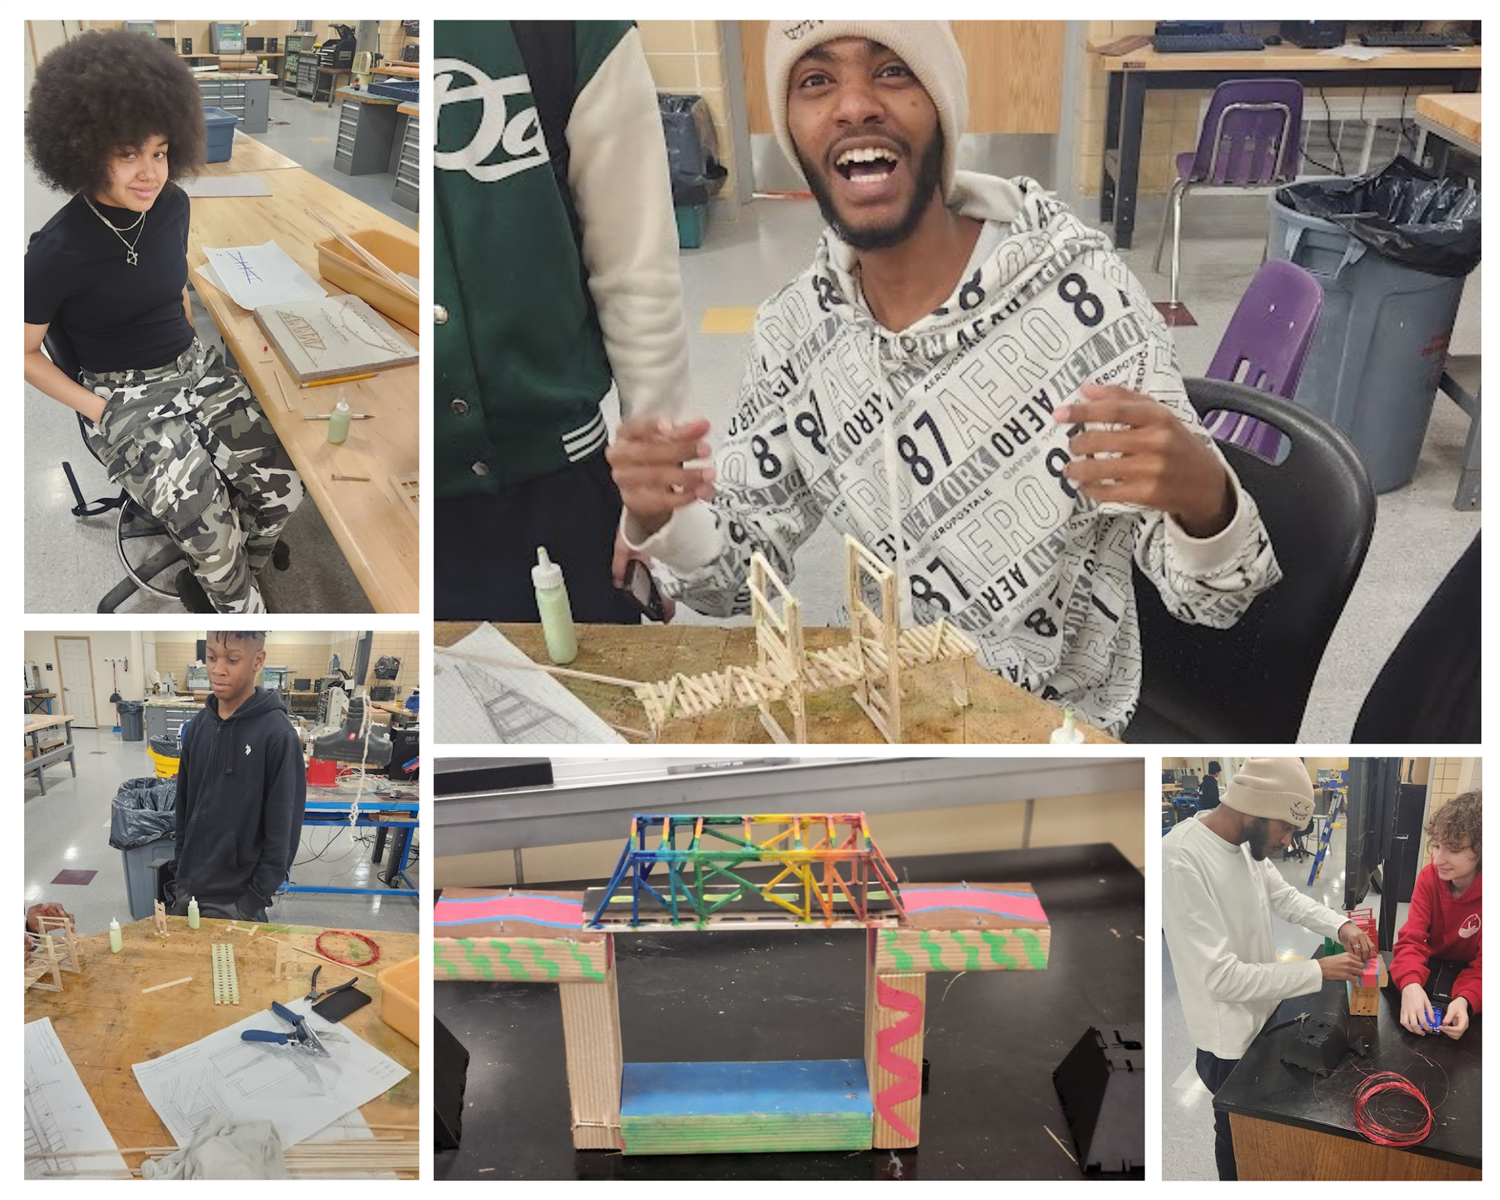 Collage of five different photos showing students at work on a project to build bridges out of balsa wood.